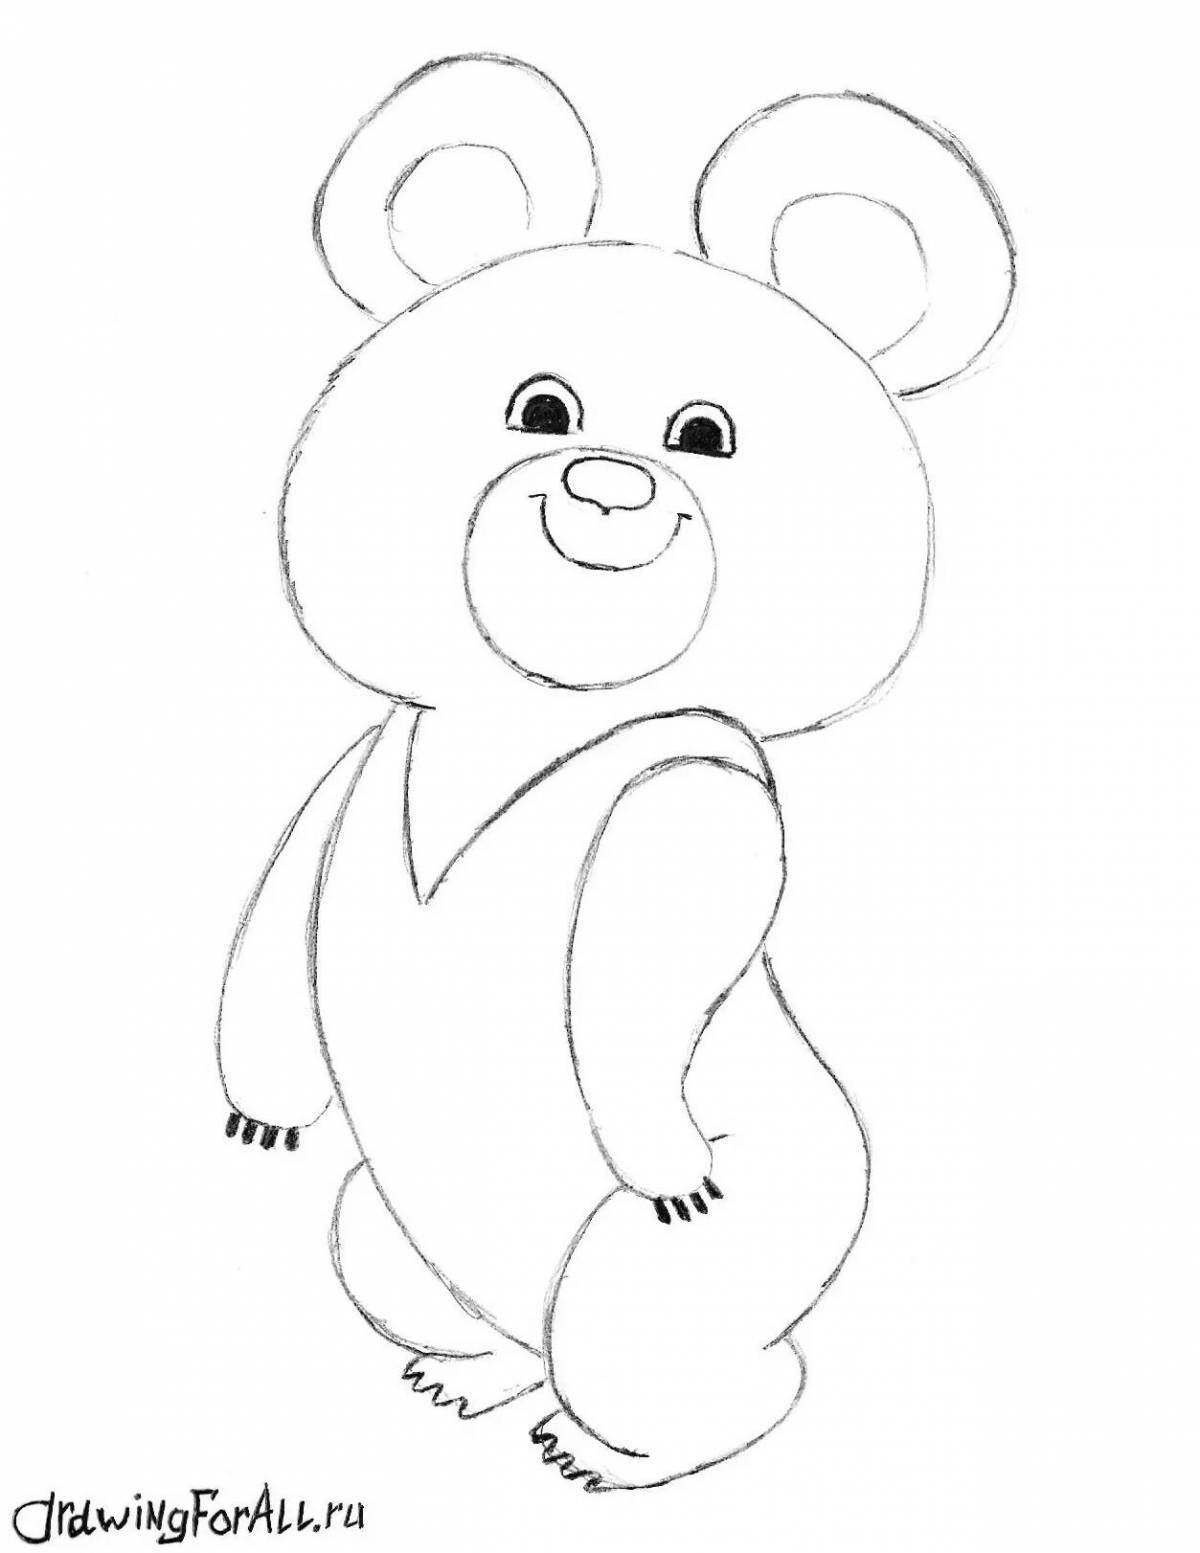 Awesome olympic bear coloring page